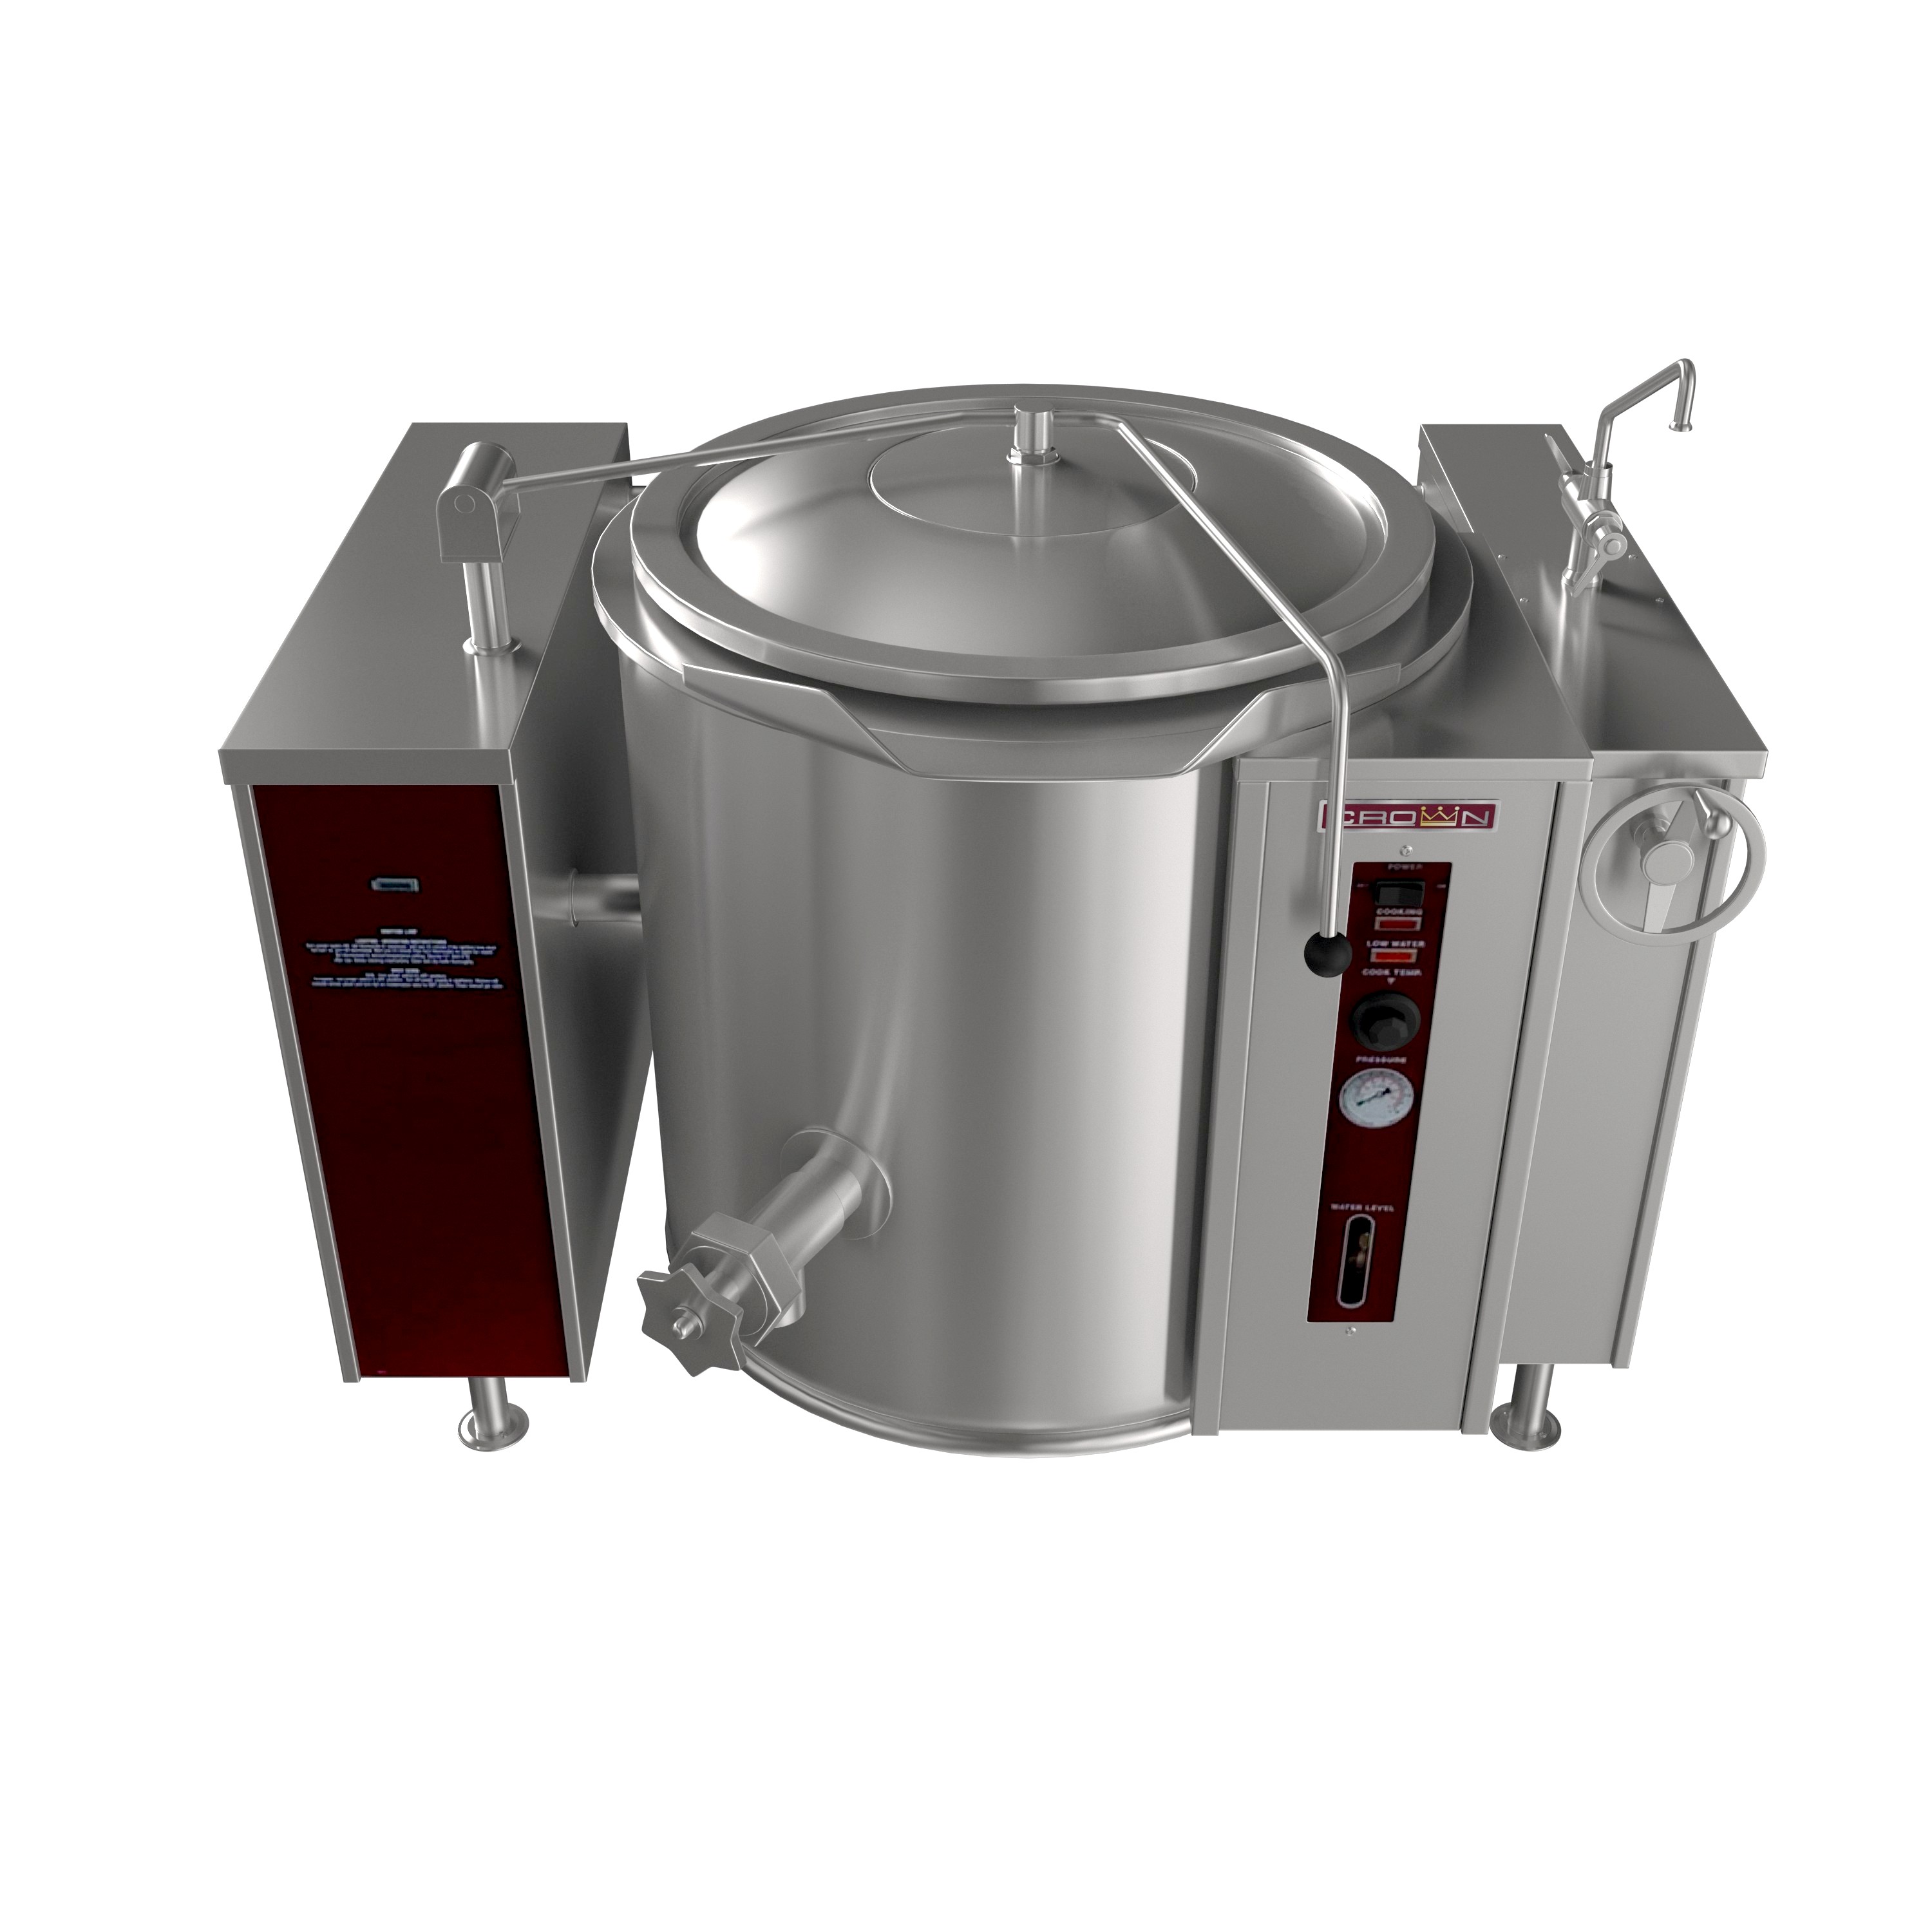 Tilting Kettle, gas, 40 gallon capacity, 2/3 jacket, thermostatic control,  electronic ignition